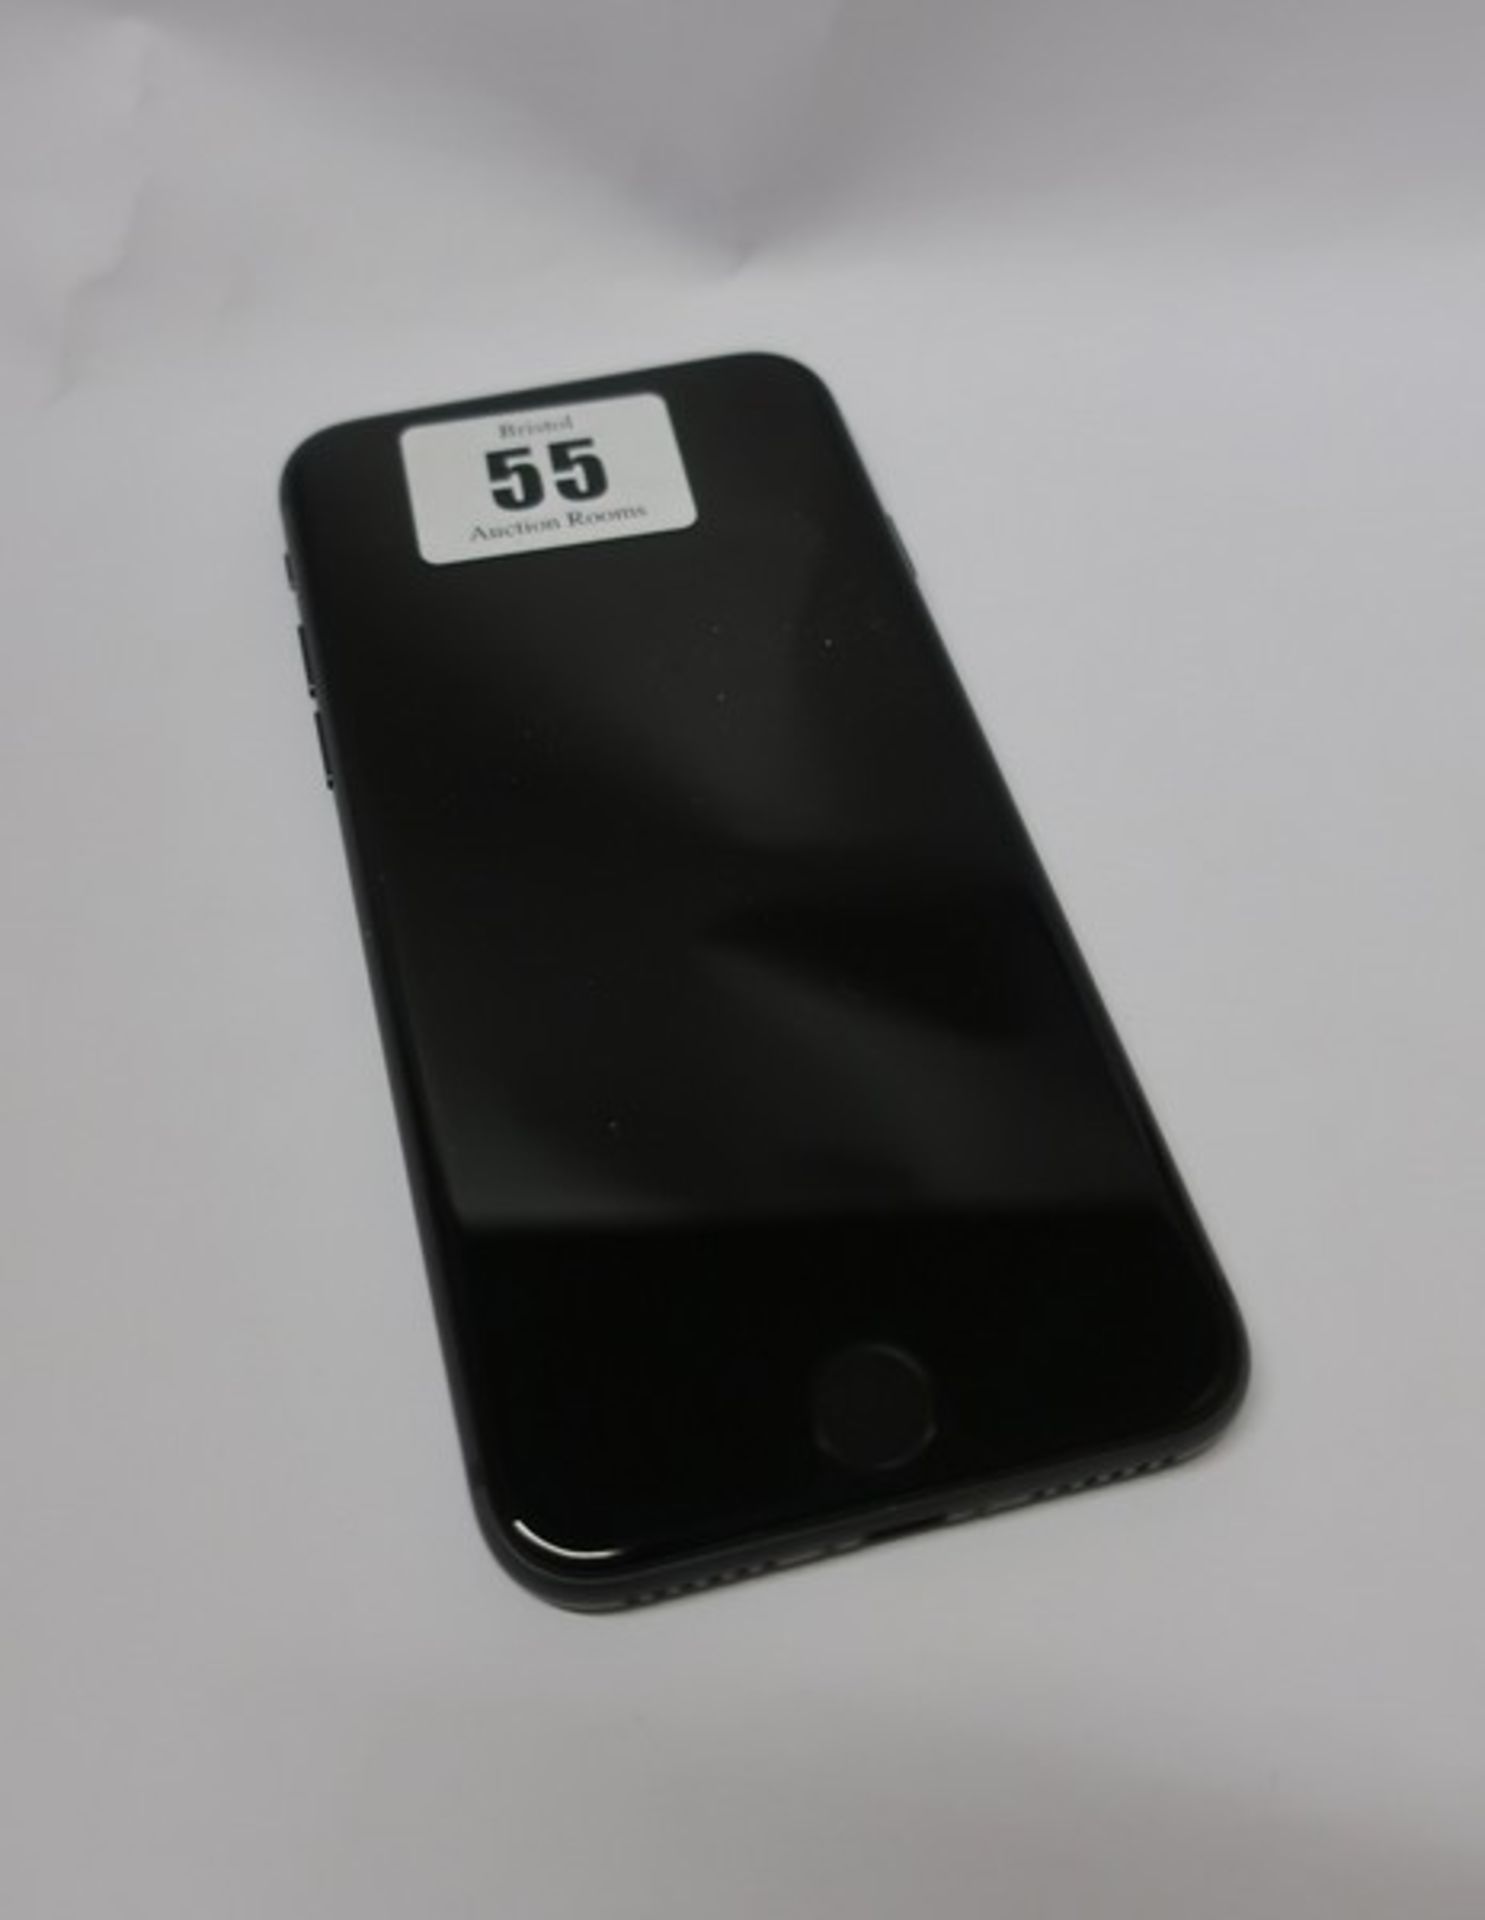 An Apple iPhone 8 A1863 256GB in Space Gray (IMEI: 356698085810845) (Activation clear).